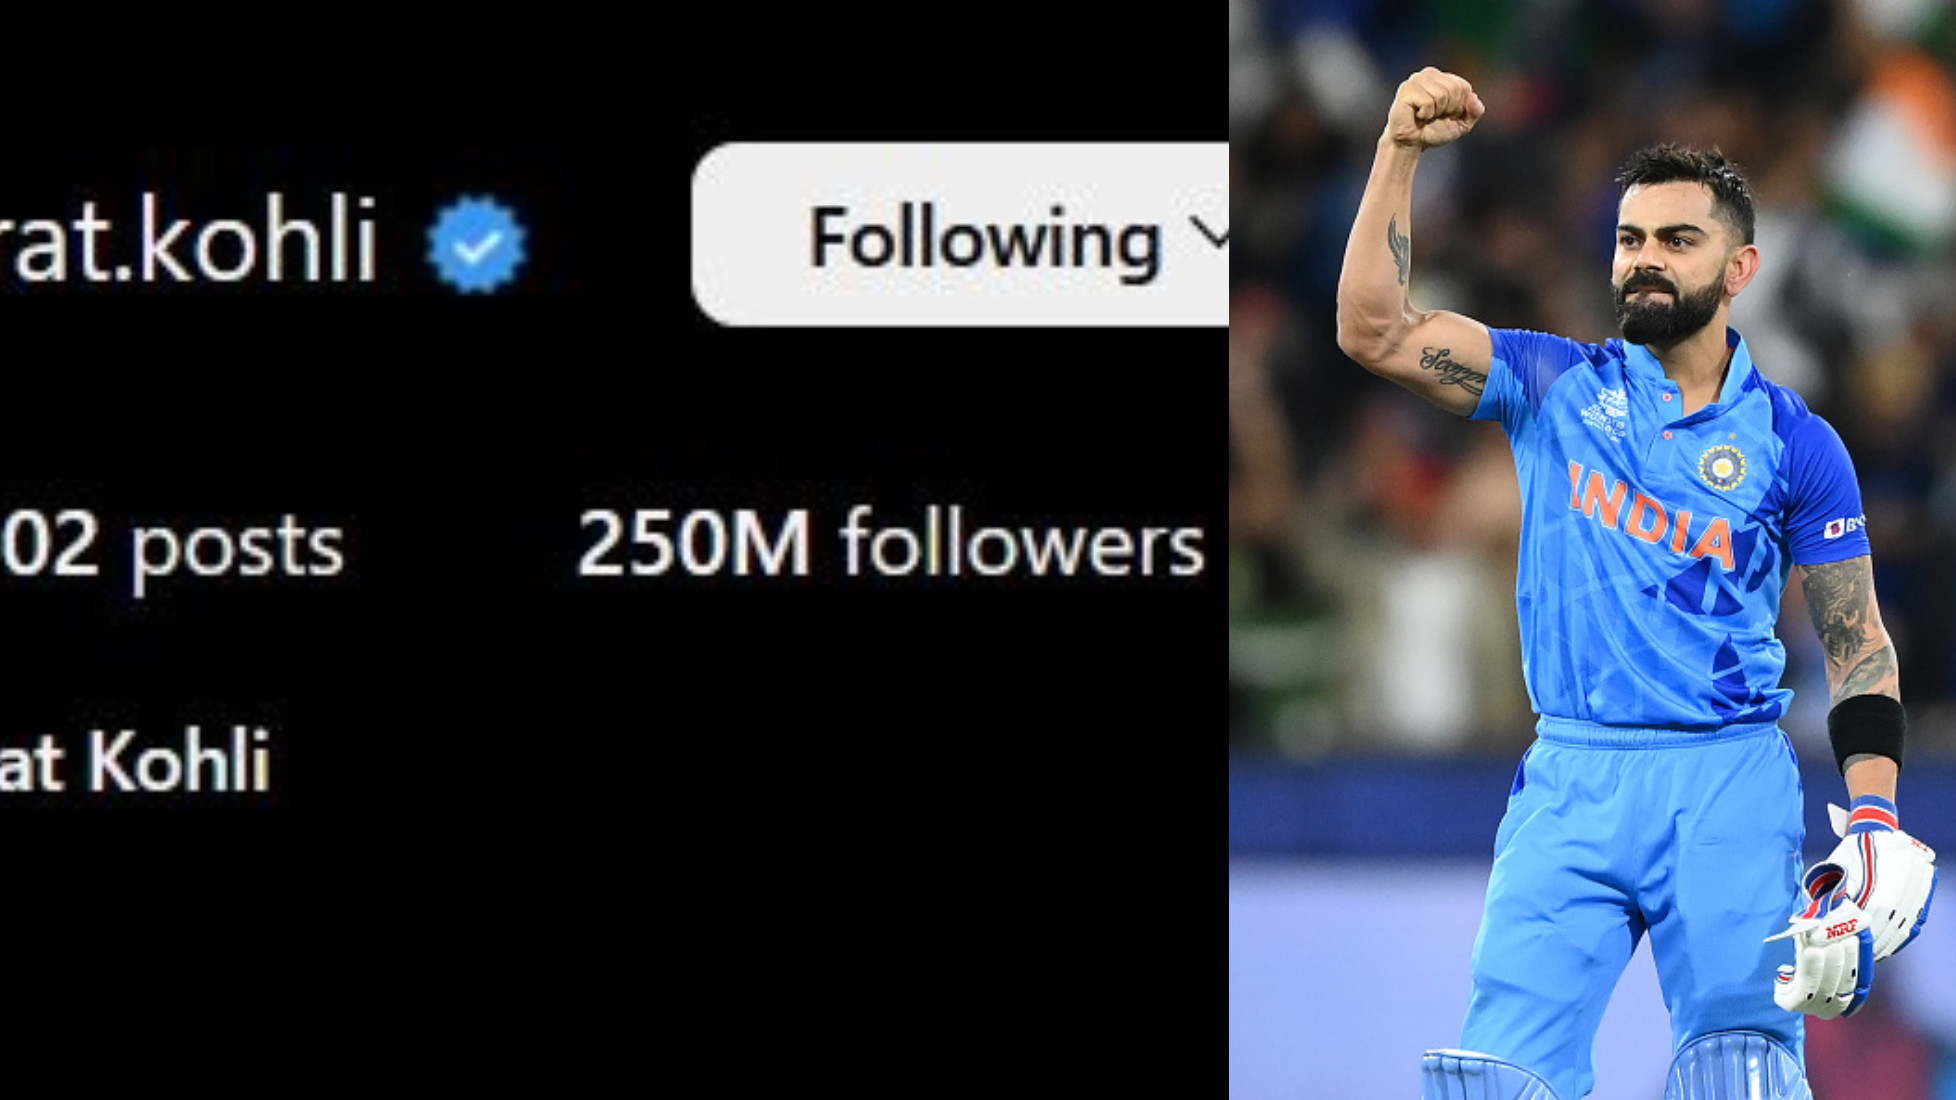 Virat Kohli becomes only Indian and Asian with 250 million Instagram followers